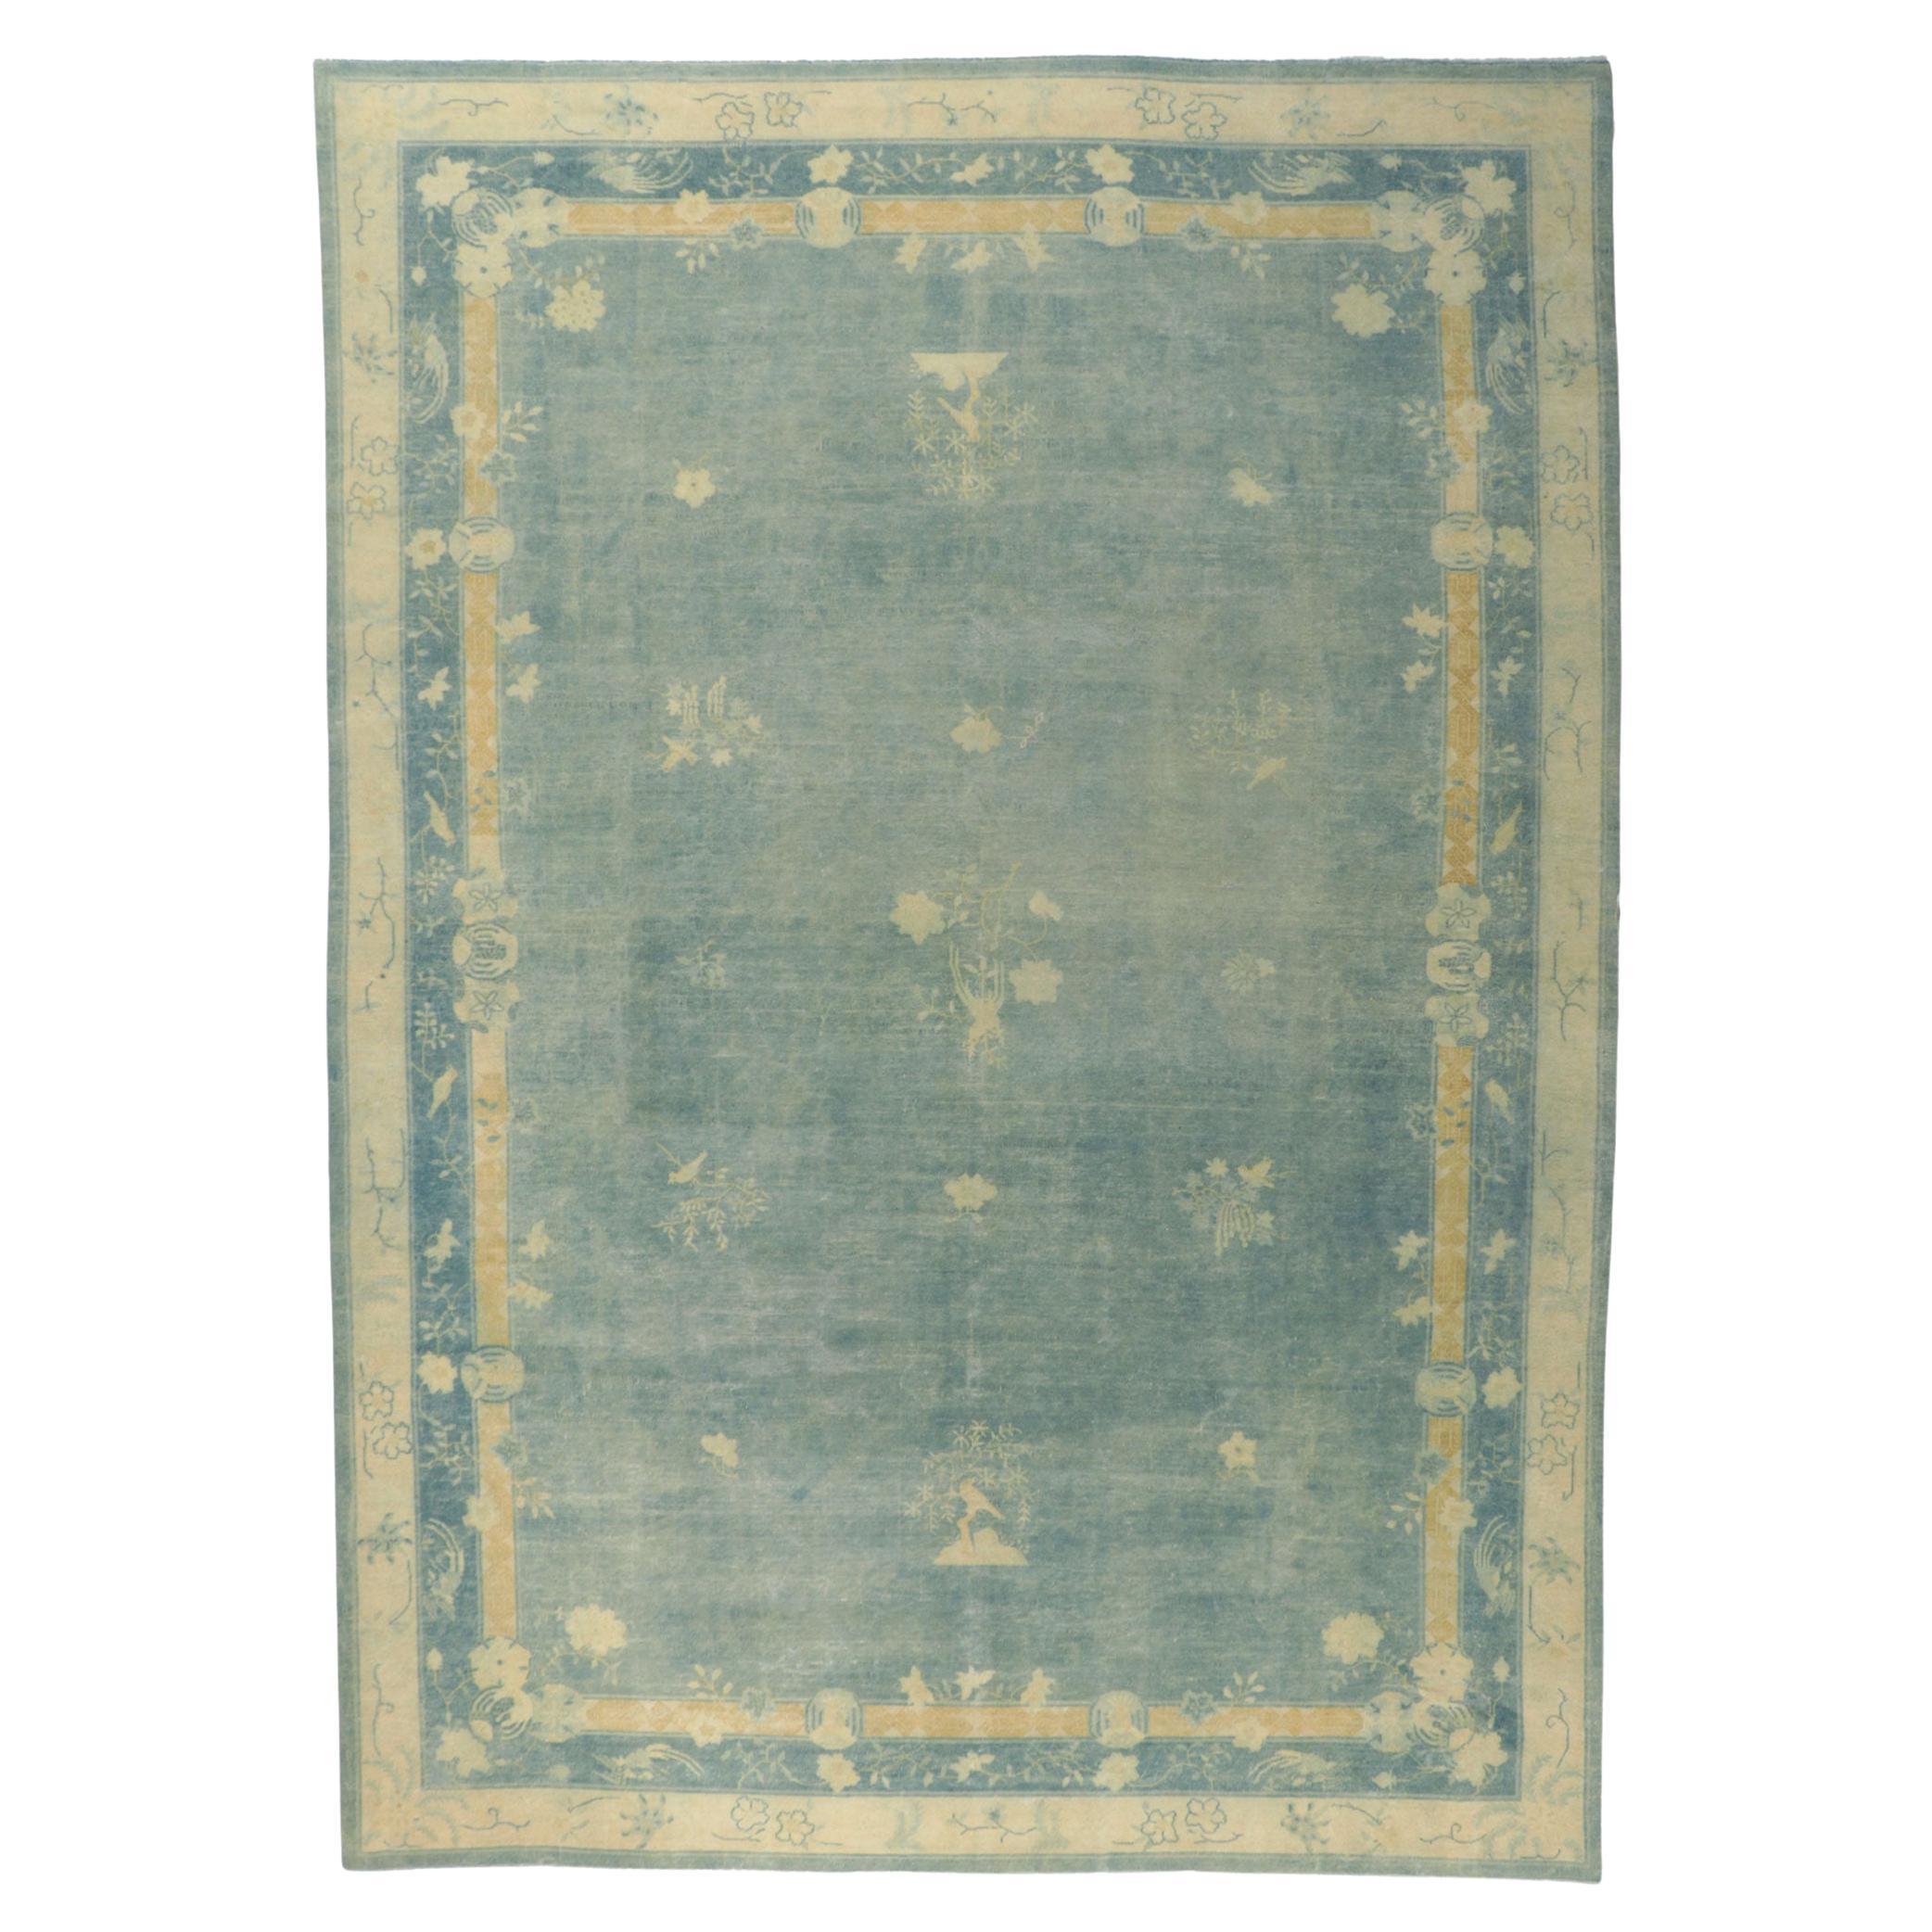 1880s Antique Chinese Peking Rug, Chinoiserie Chic Meets Quiet Sophistication For Sale